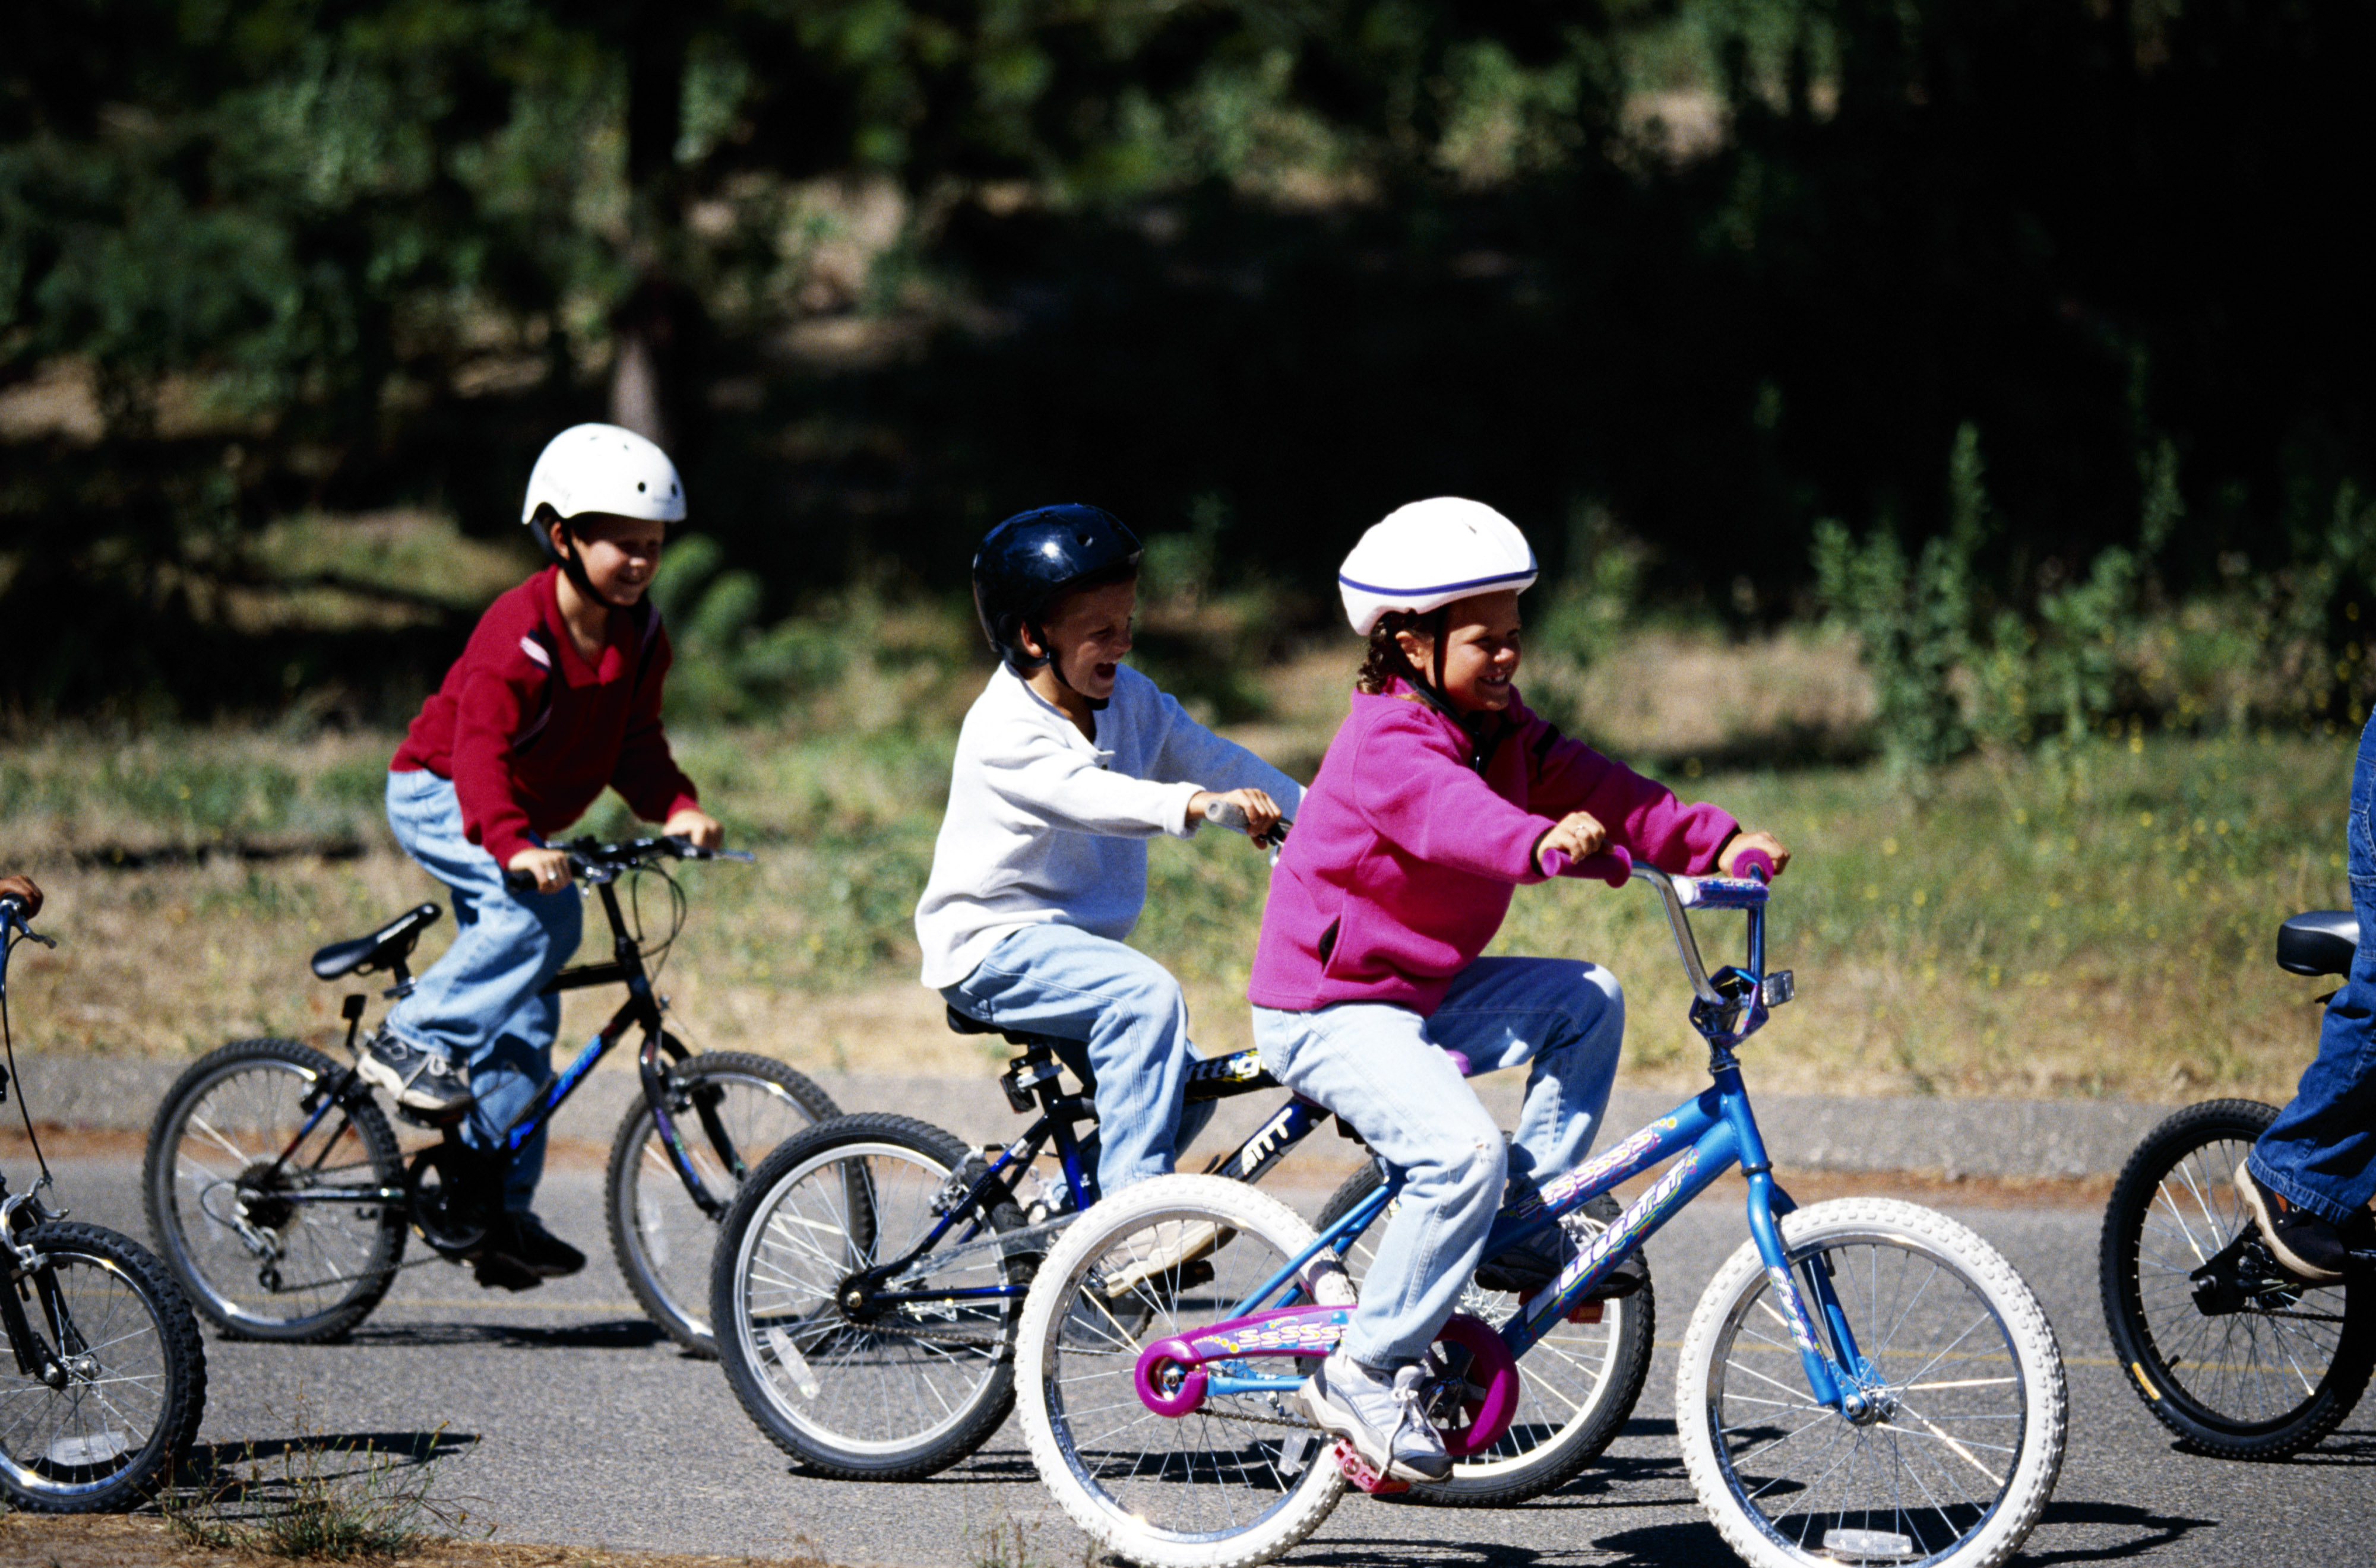 Young children riding bikes in a park